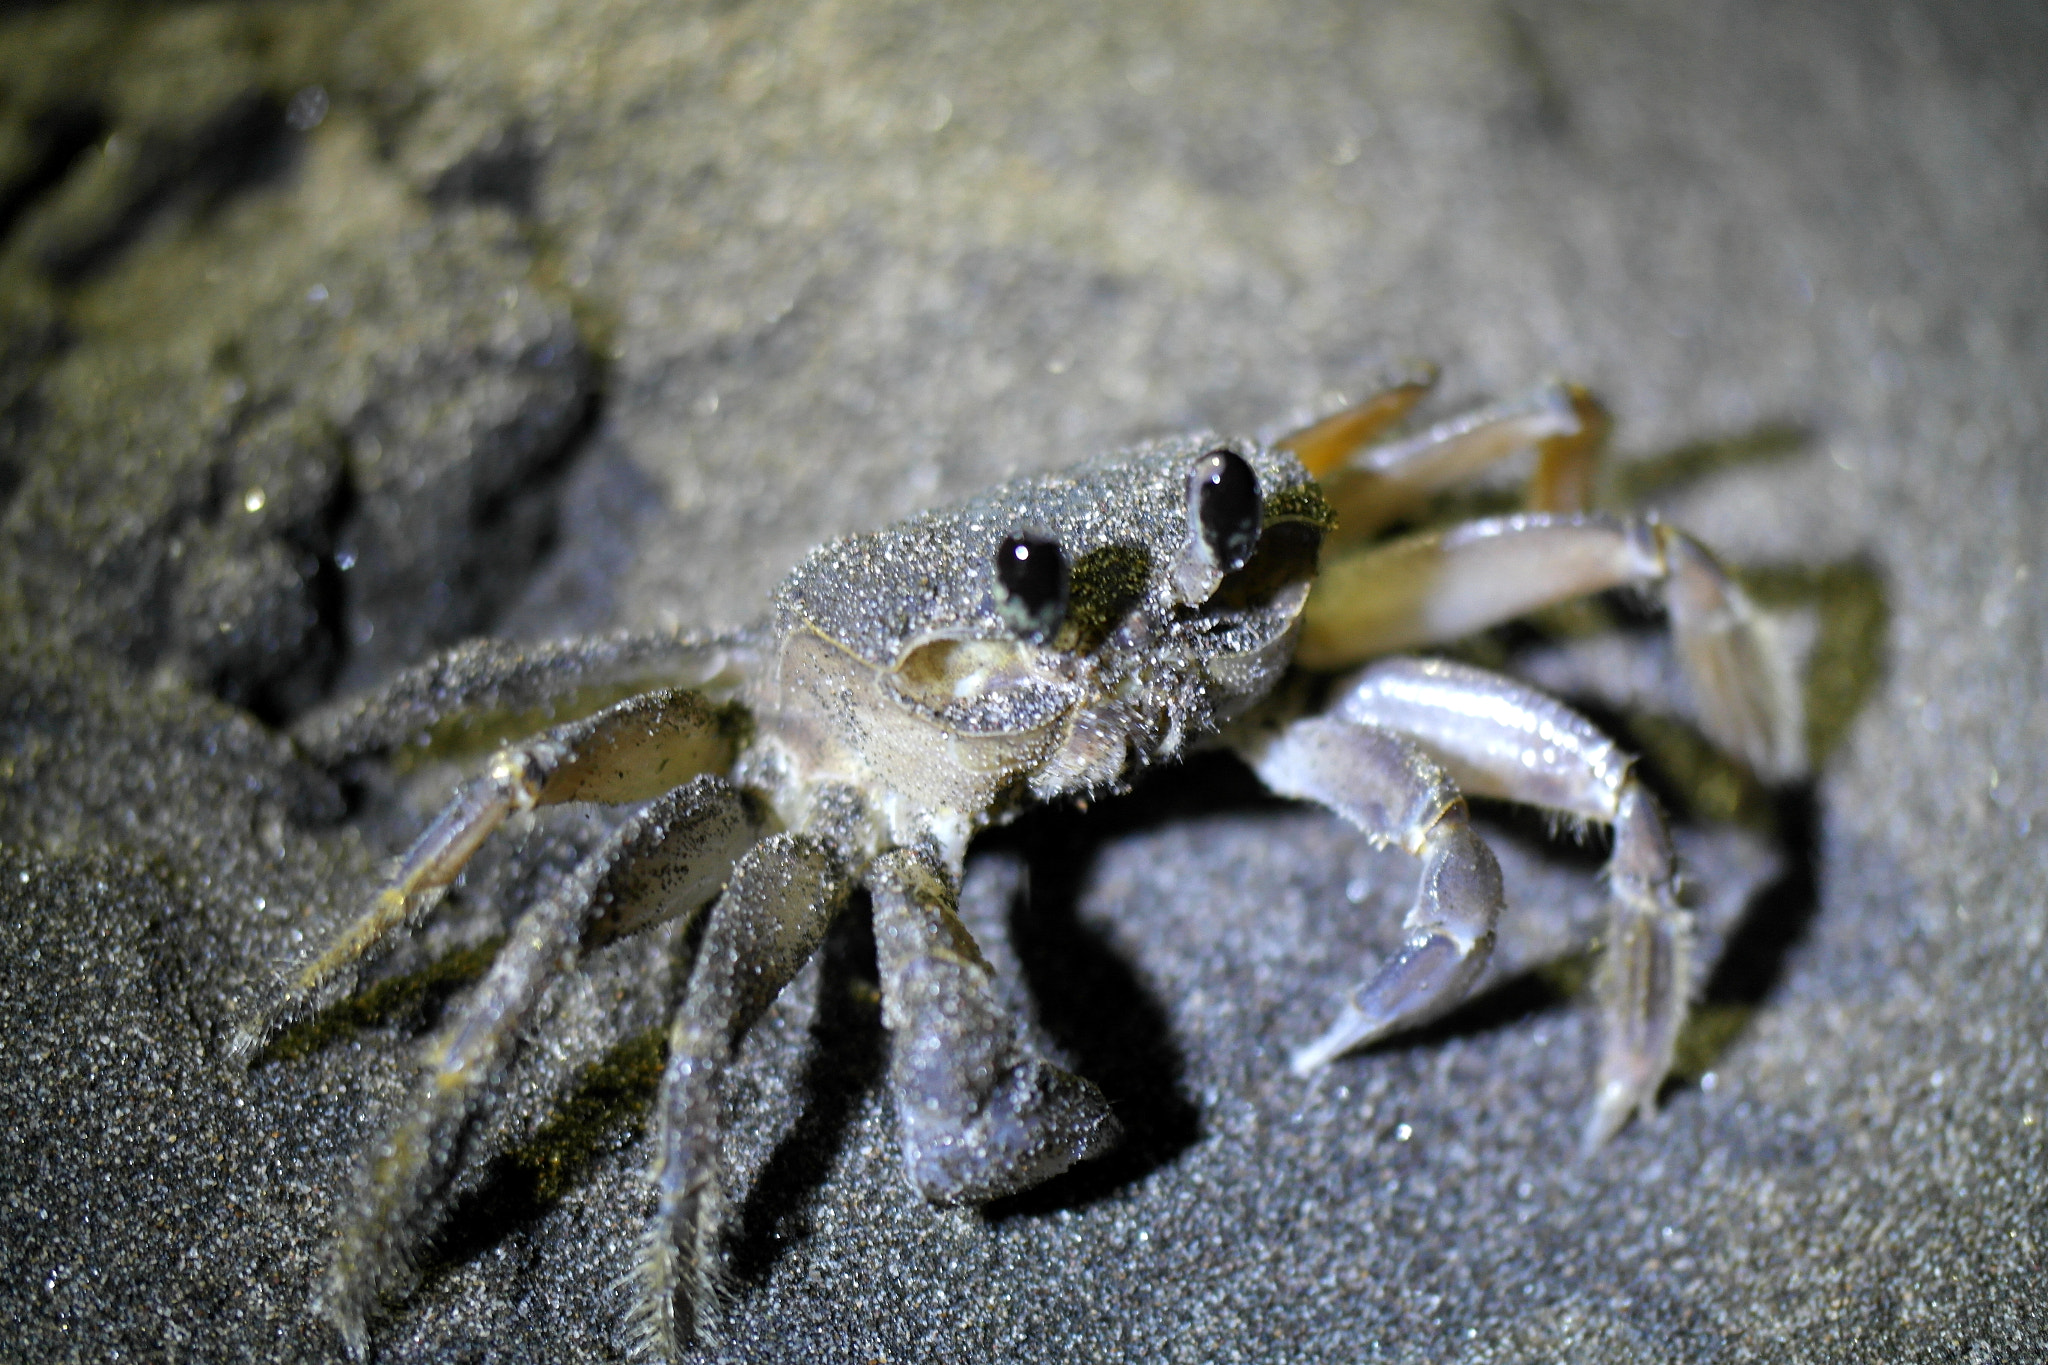 Samsung NX200 sample photo. Crab on a nightly walk at the beach photography